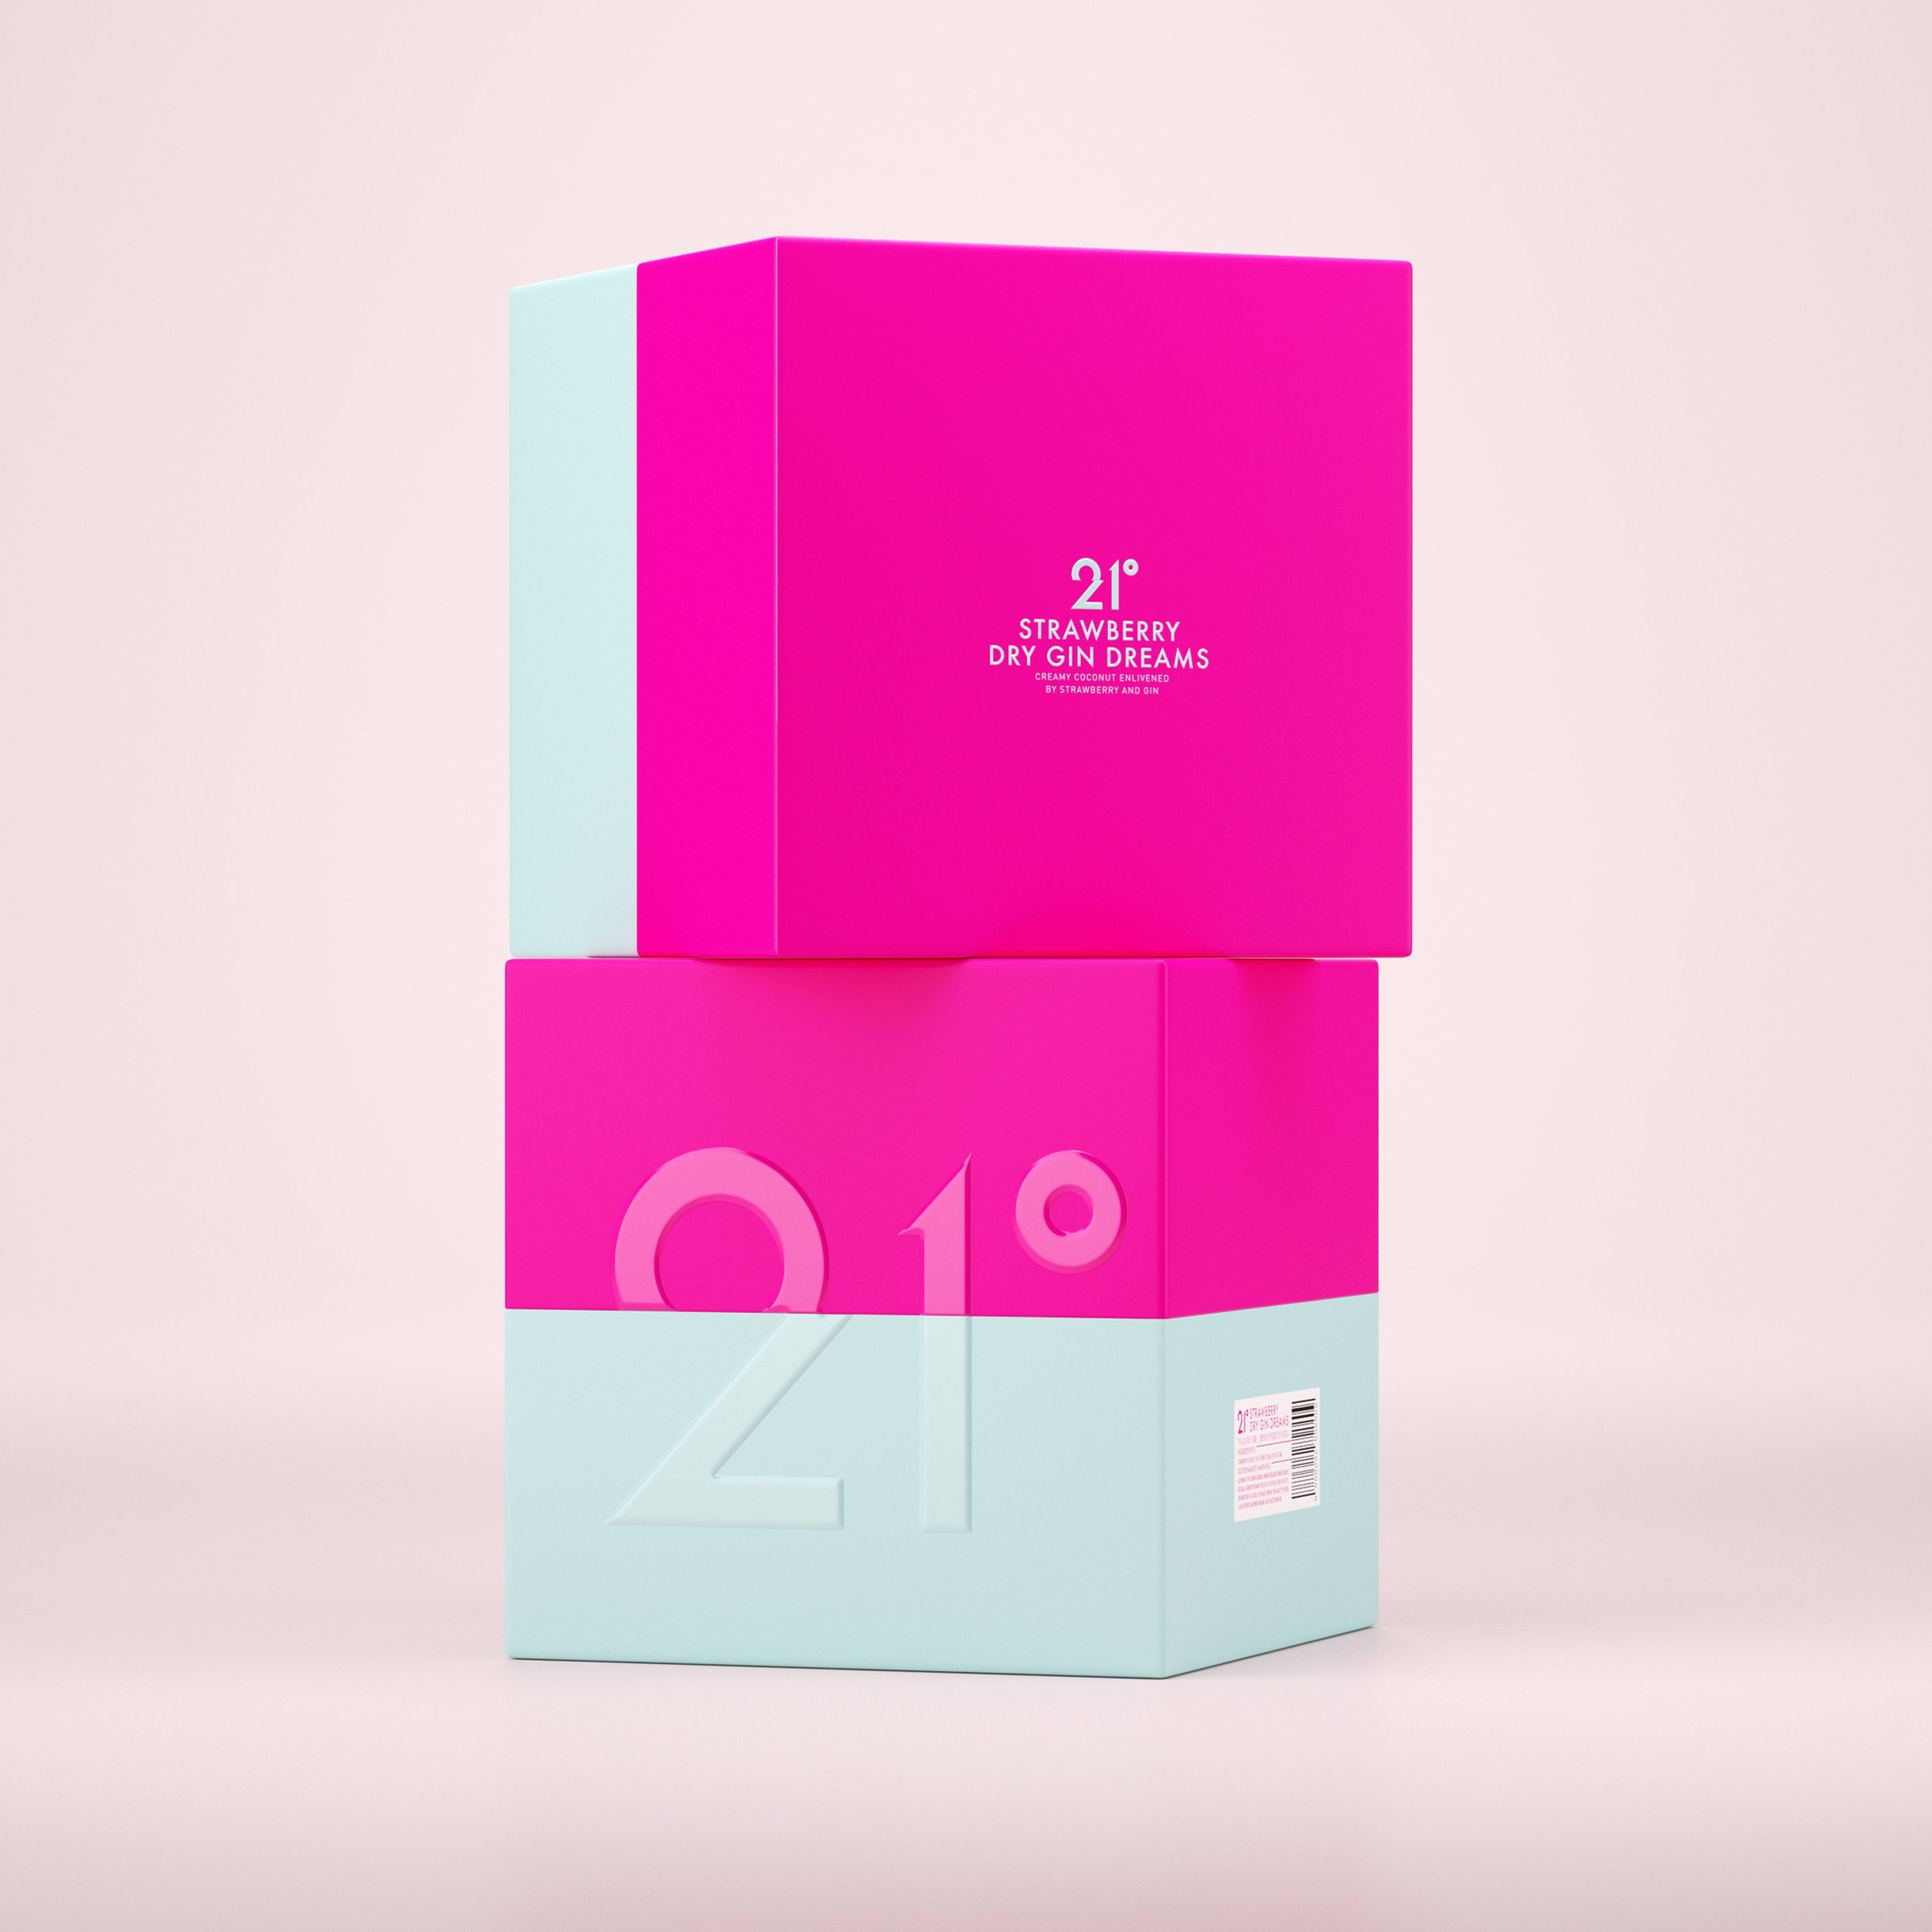 Packaging Design for 21º Alcoholic Drinks